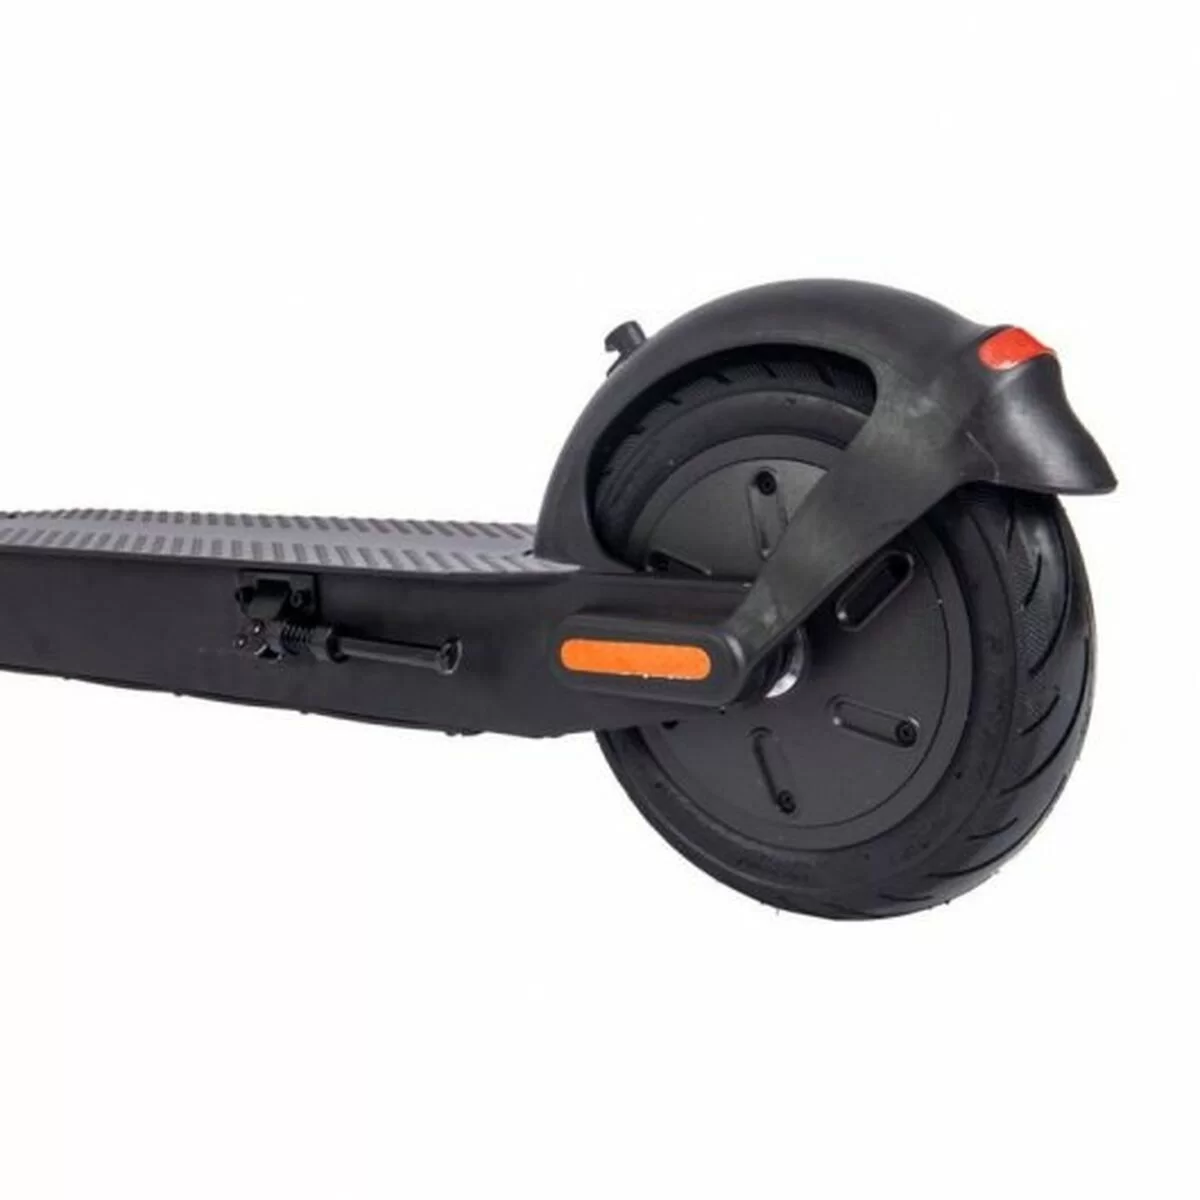 B-mov Freestyle 5 Electric Scooter Black